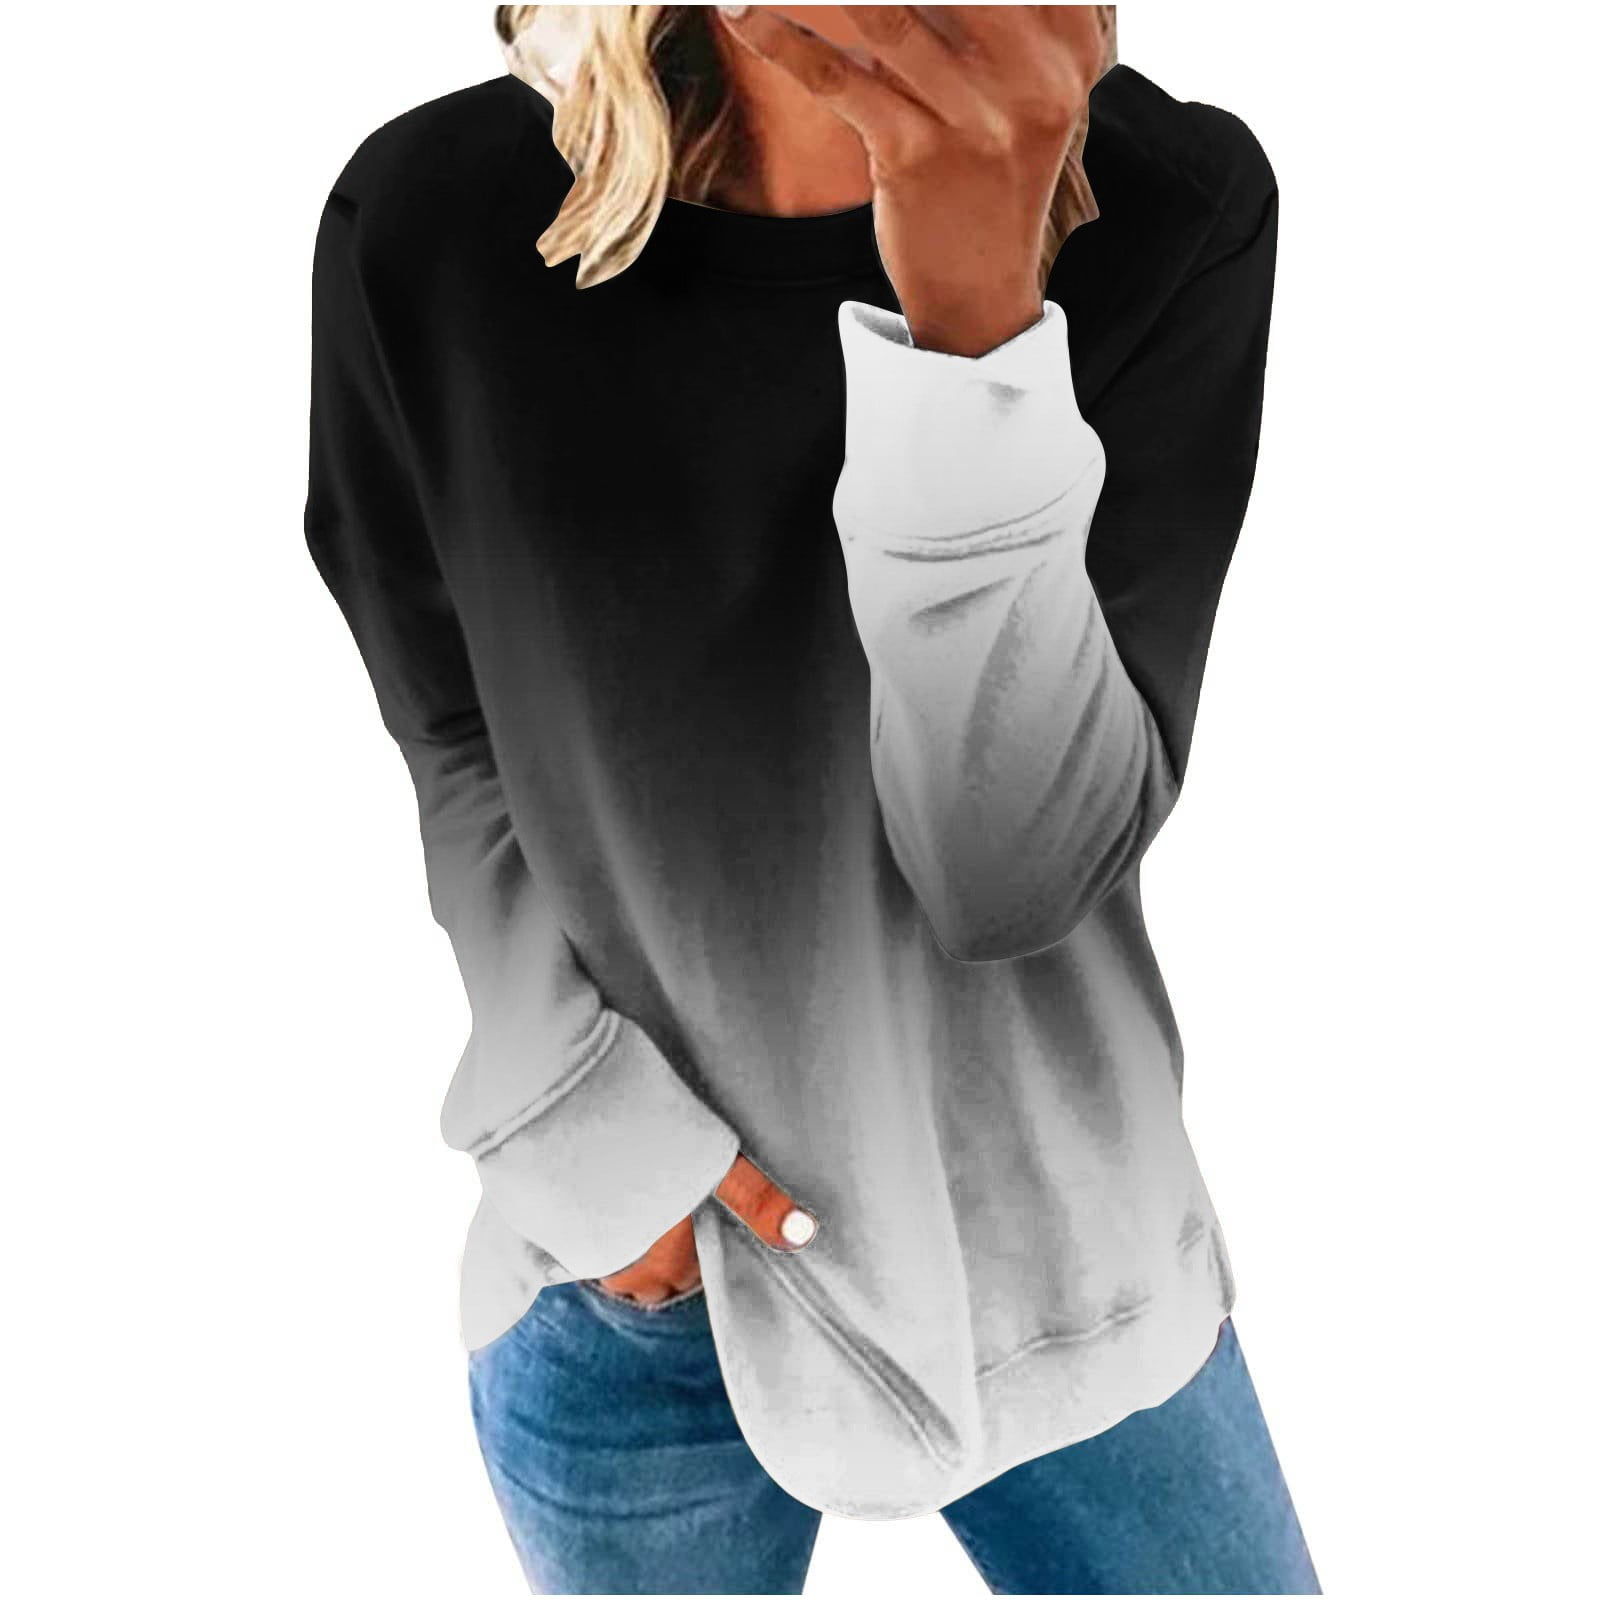 Graphic Print Long Sleeve Tops for Women Fashion Turtleneck Cozy Fleece  Casual Loose Pullover Sweatshirts with Pockets(Navy,S) 